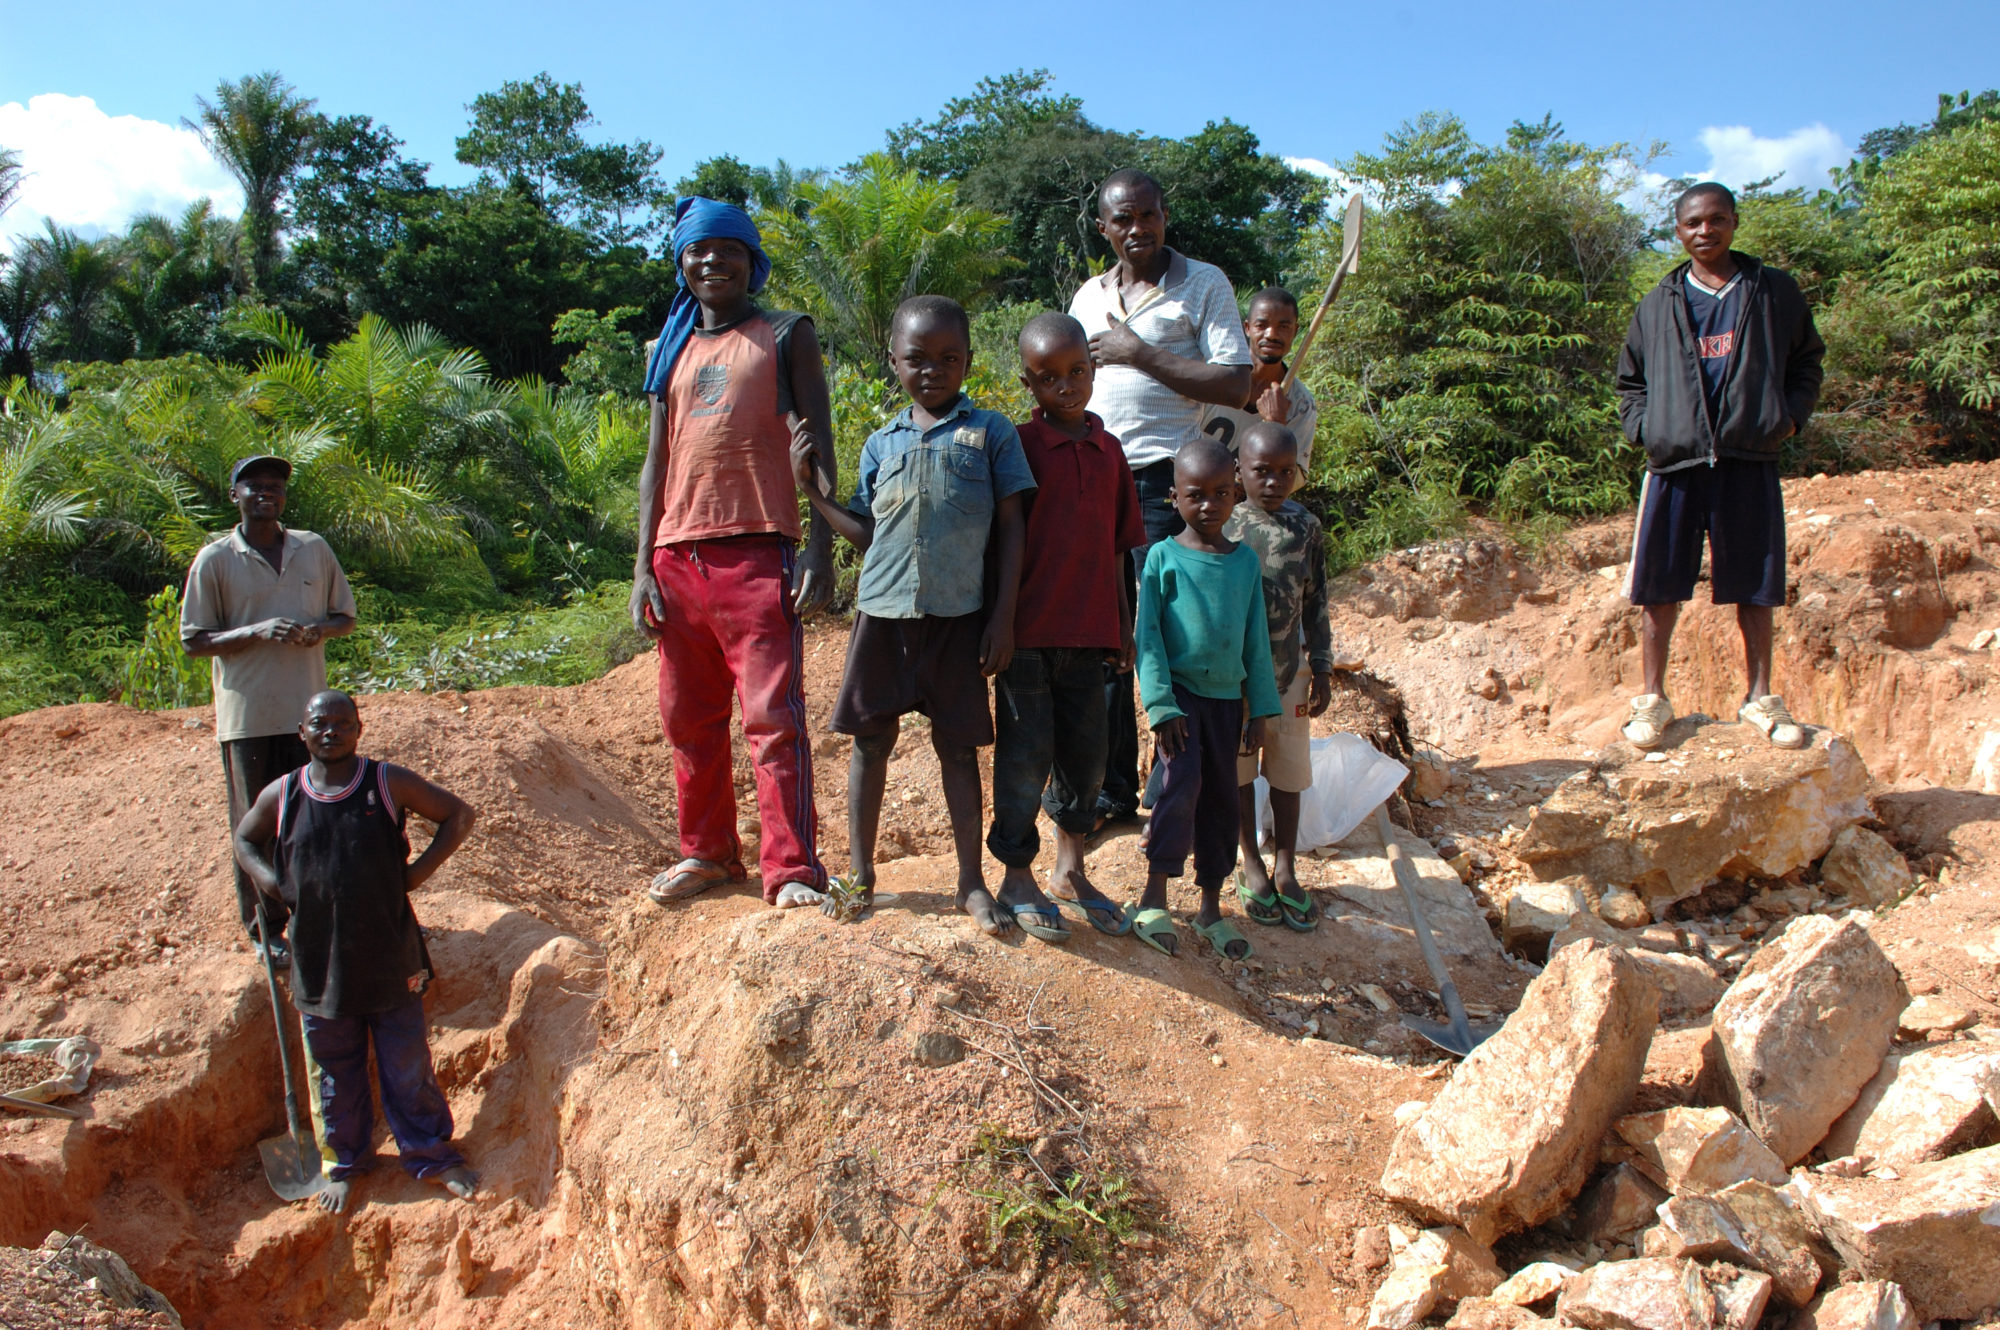 The Dirty Sources of Clean Energy: A Case Study in Cheap Piety - Cobalt Mining - Democratic Republic of Congo